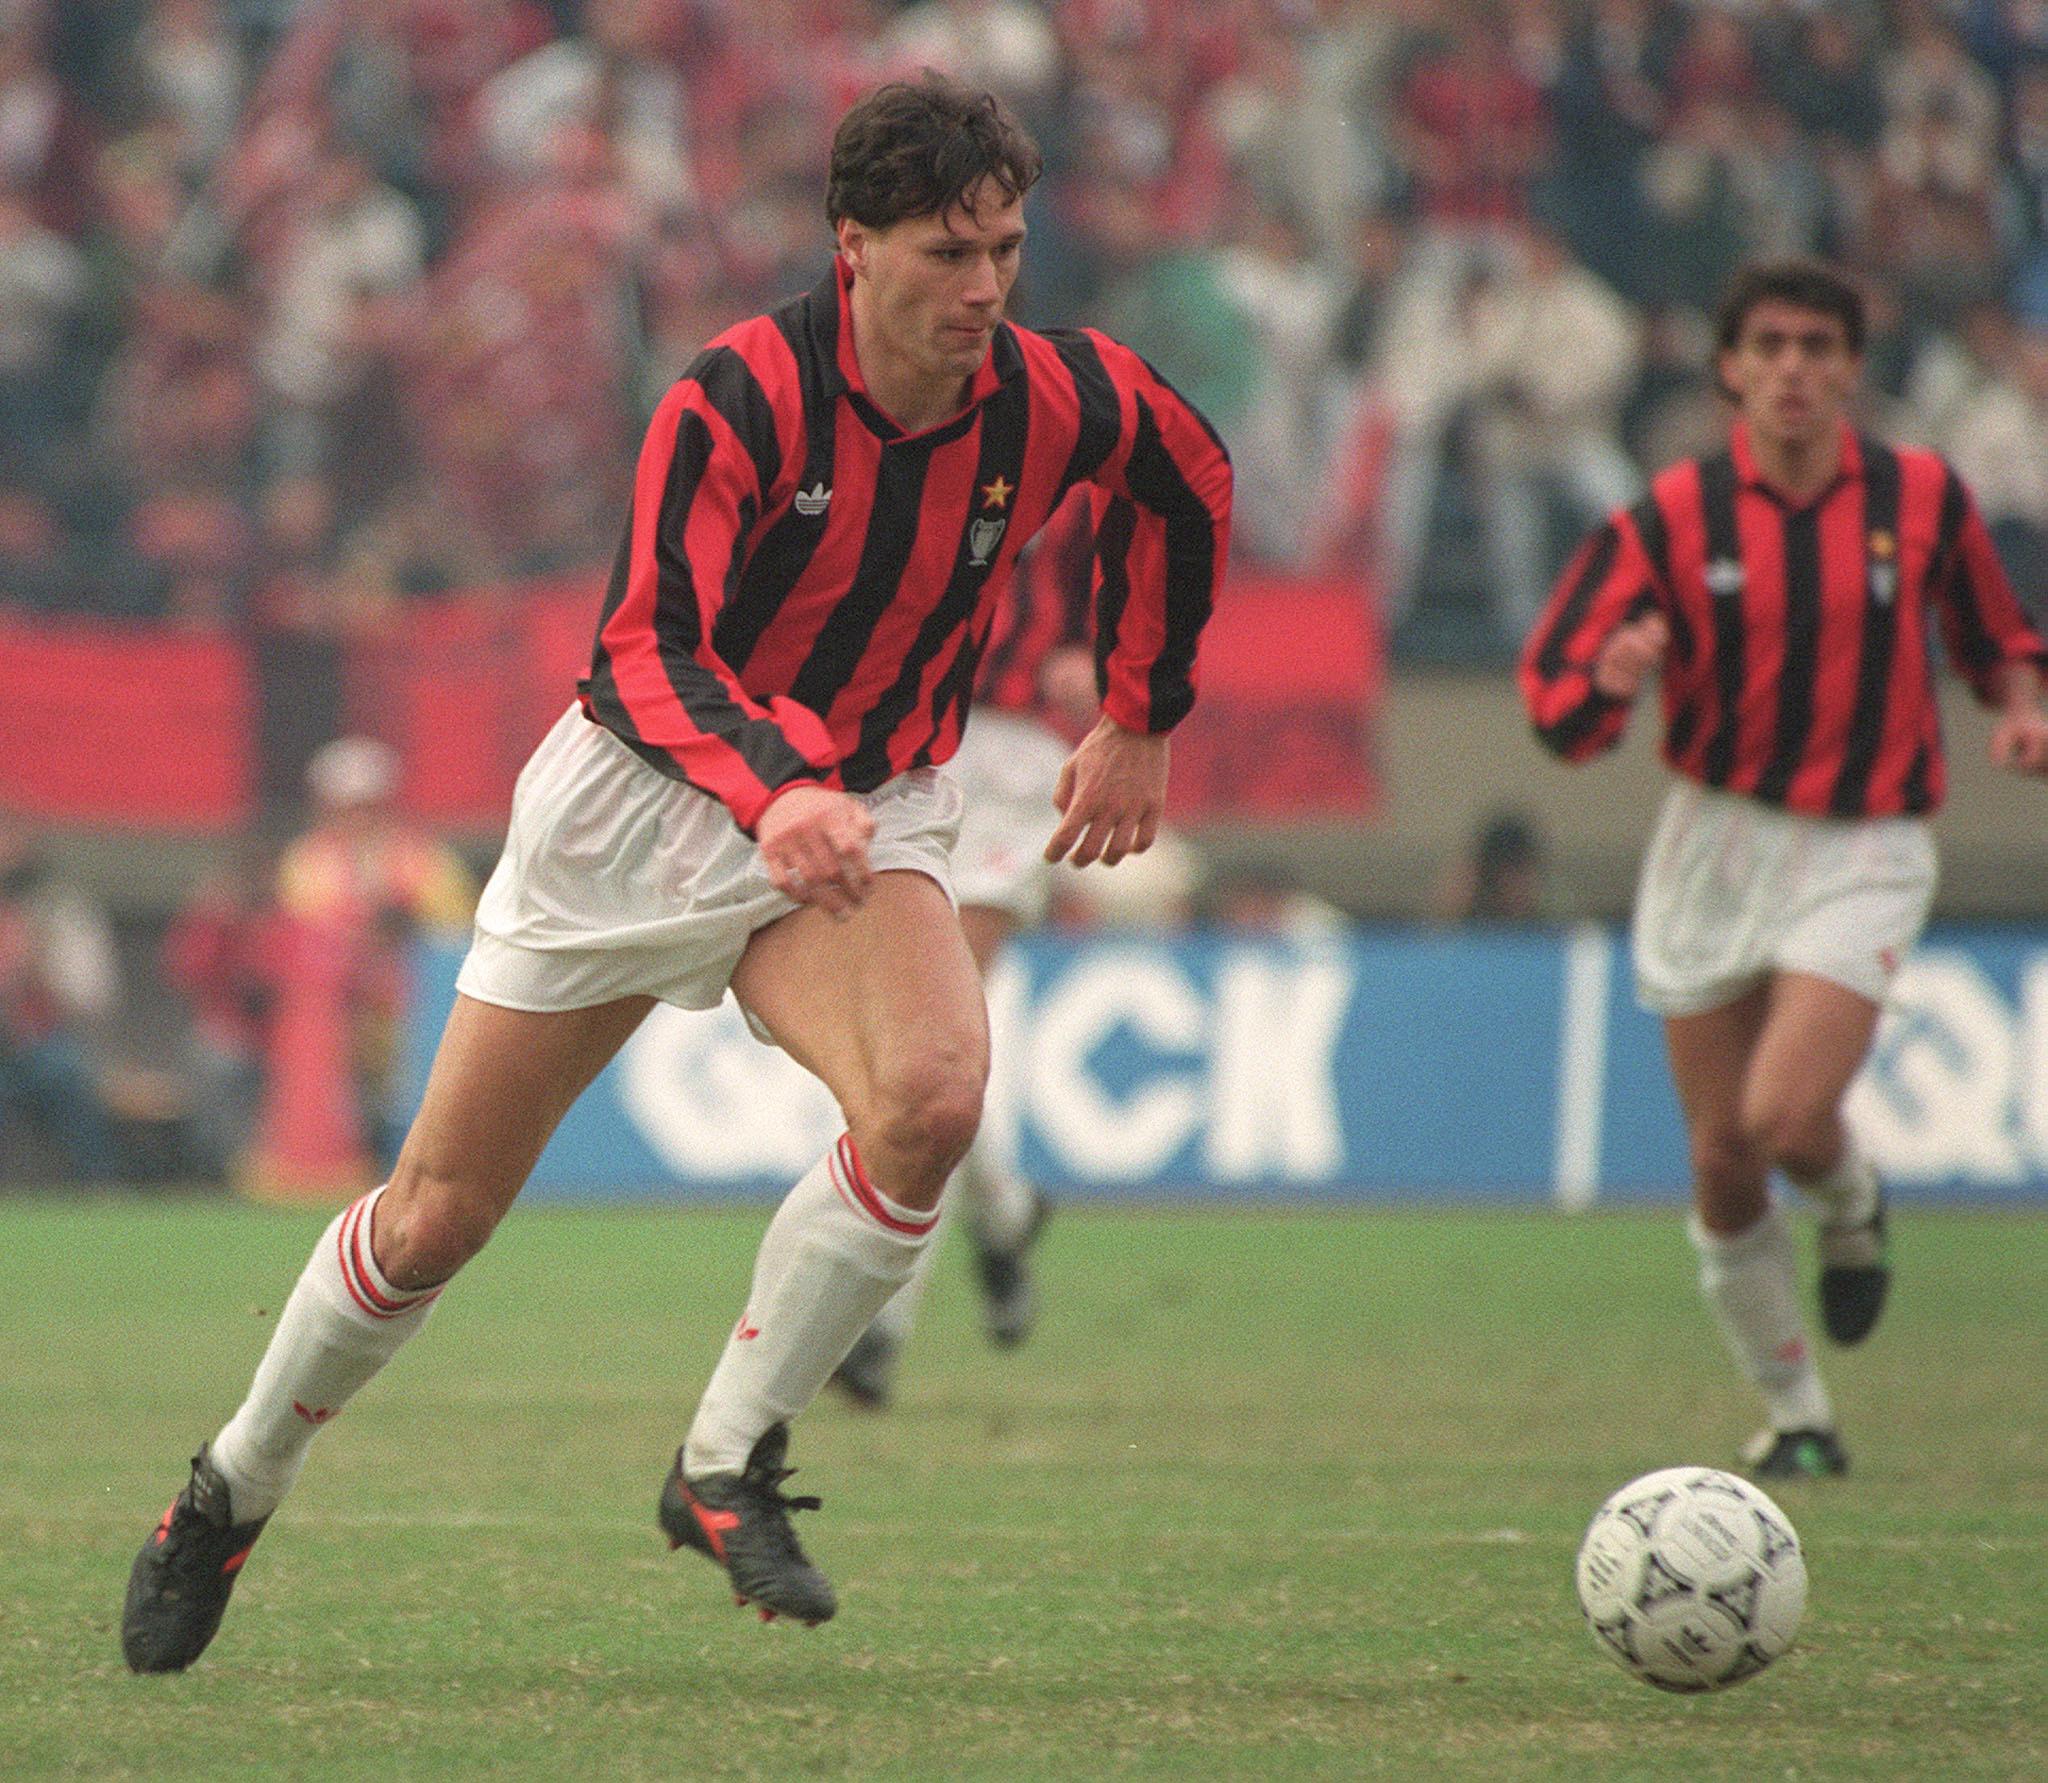 TOKYO, JAPAN: AC Milan's Dutch forward Marco Van Basten dribbles upfield, 09 December 1990 in Tokyo, during the Toyota Cup final between the European champion, Milan, and the South American champion, Olimpia. (Photo credit should read TOSHIFUMI KITAMURA/AFP/Getty Images)